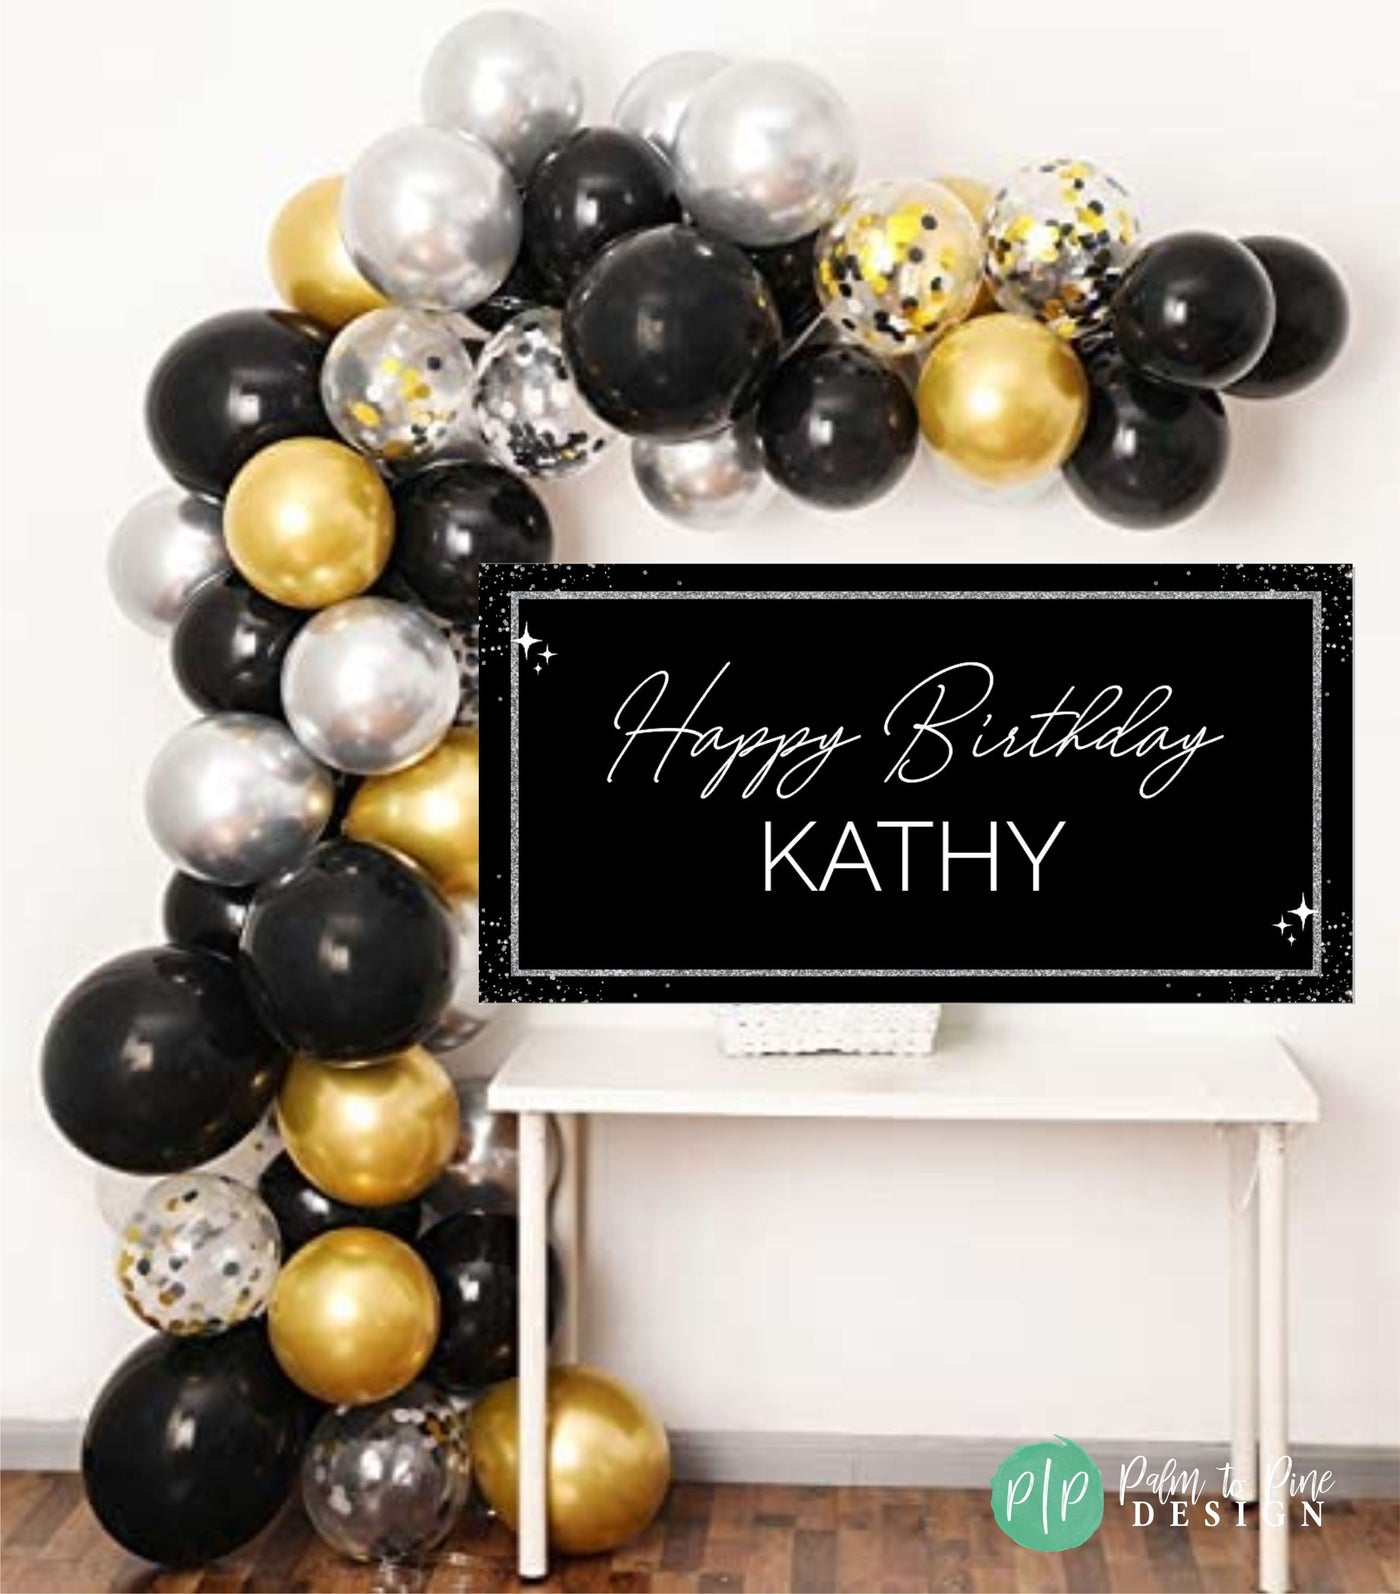 Black and Silver Personalized Banner, Black and Silver Birthday Decor, Black and Silver Birthday Sign, Black and Silver Custom Backdrop